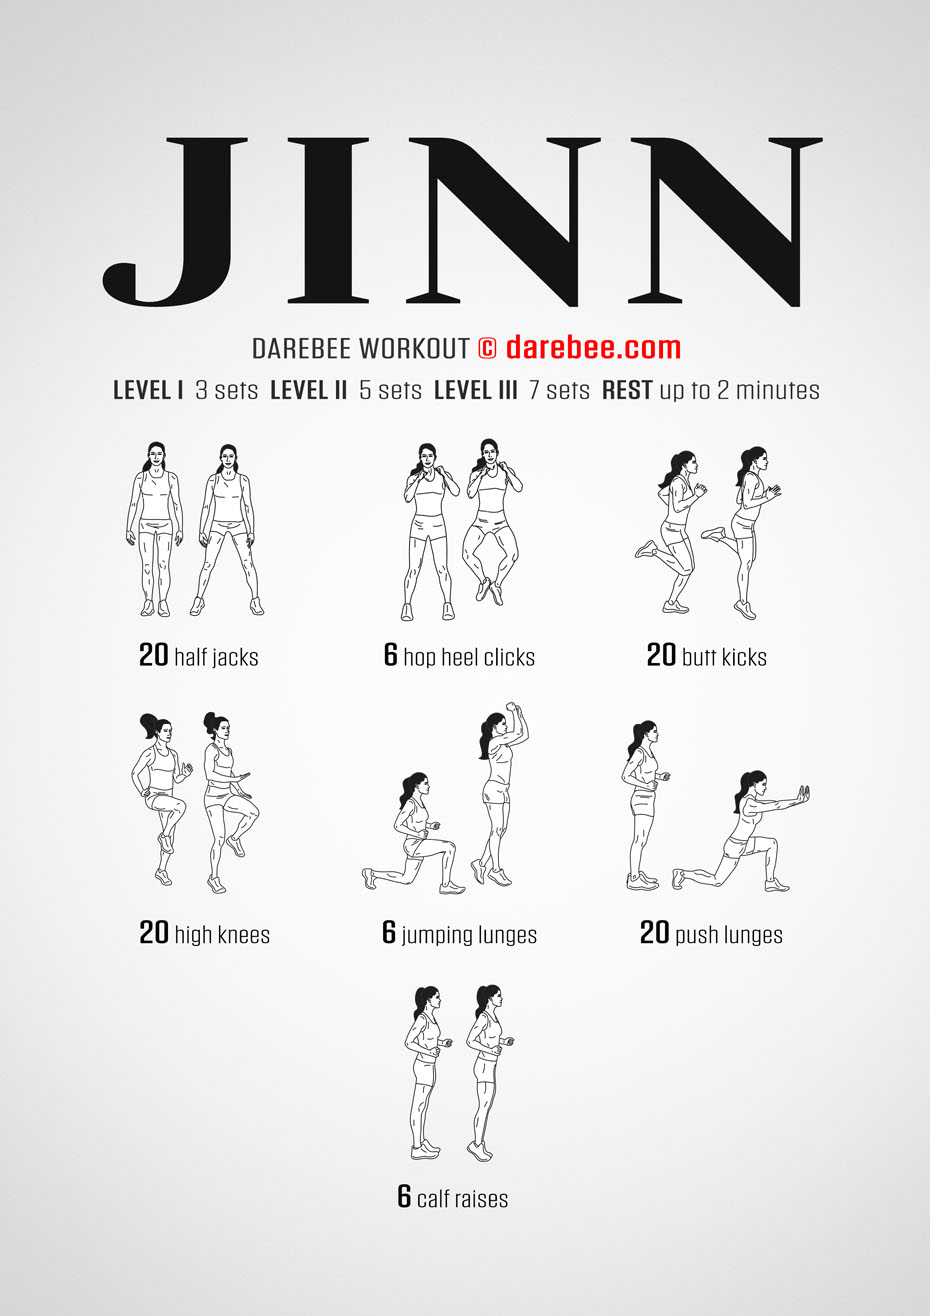 Jinn is a Darebee home-fitness workout that works your cardiovascular and aerobic systems and raises your heartbeat and body temperature.